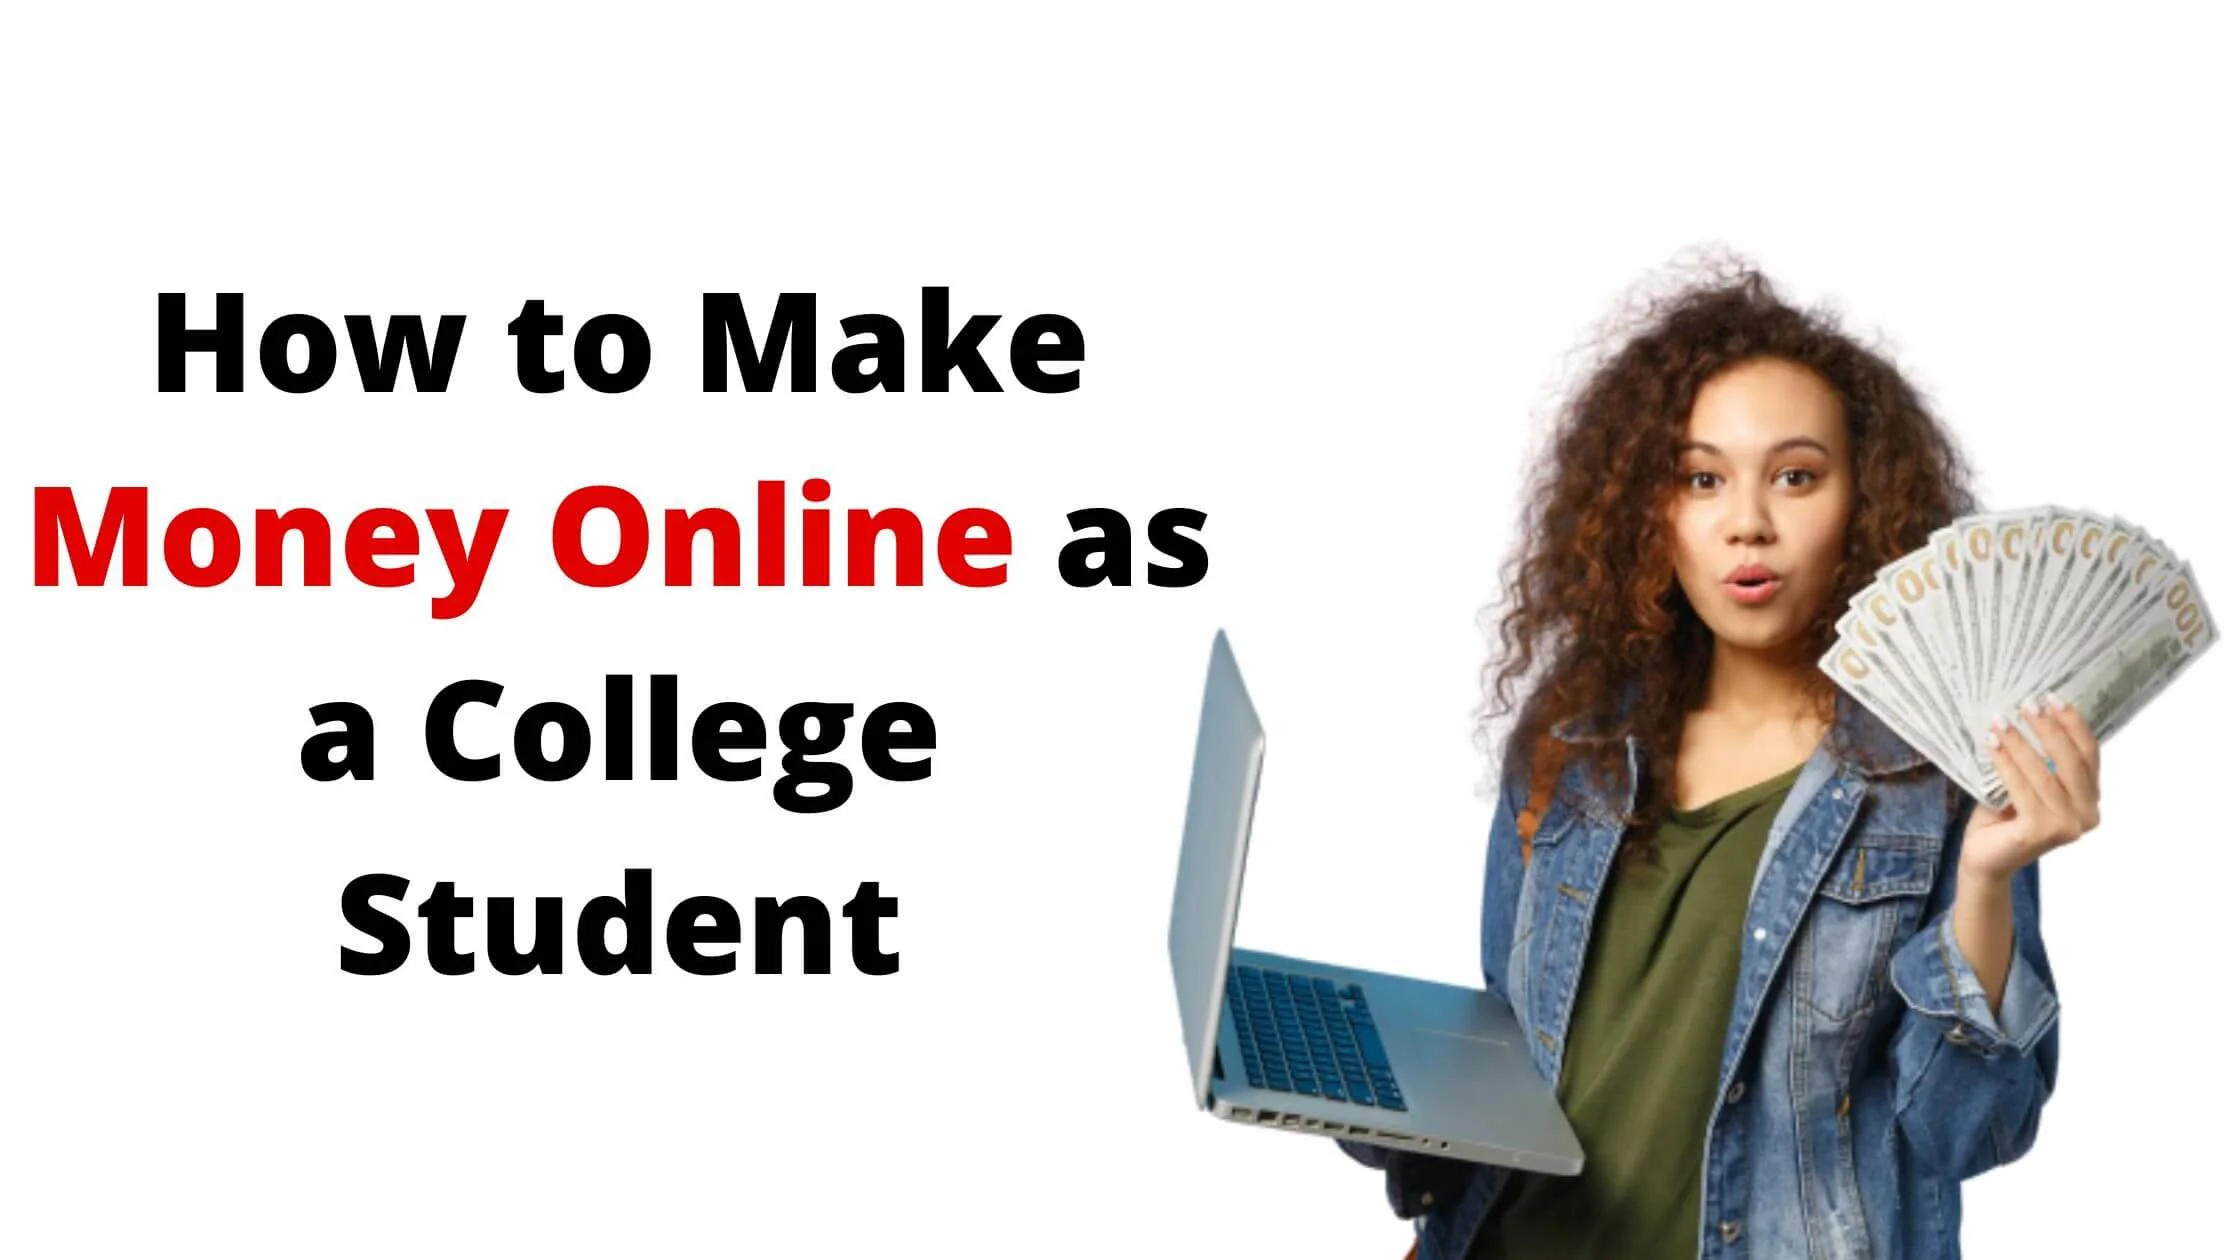 Make Money Online as a College Student